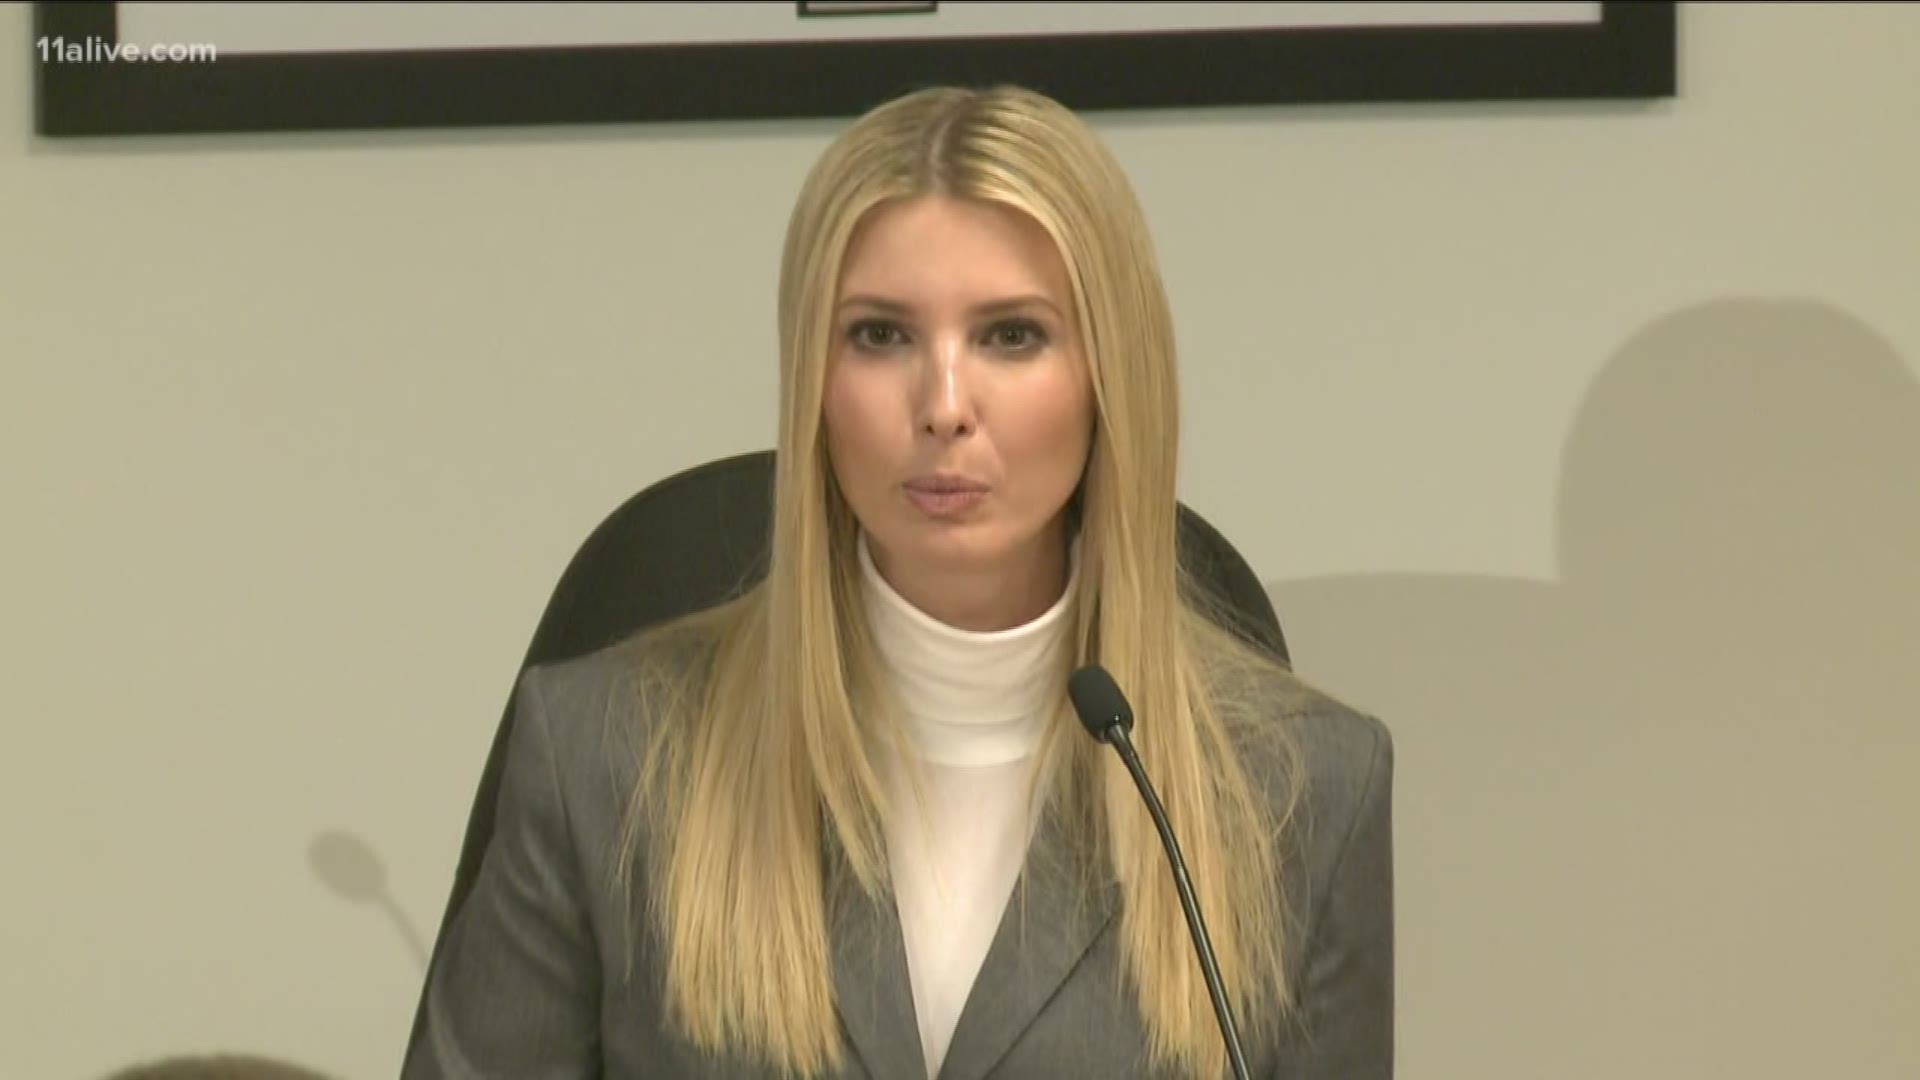 Ivanka Trump, President Donald Trump's oldest daughter and one of his top advisers, was in metro Atlanta on Wednesday to tour a UPS training facility with Gov. Brian Kemp and his wife, Marty Kemp.